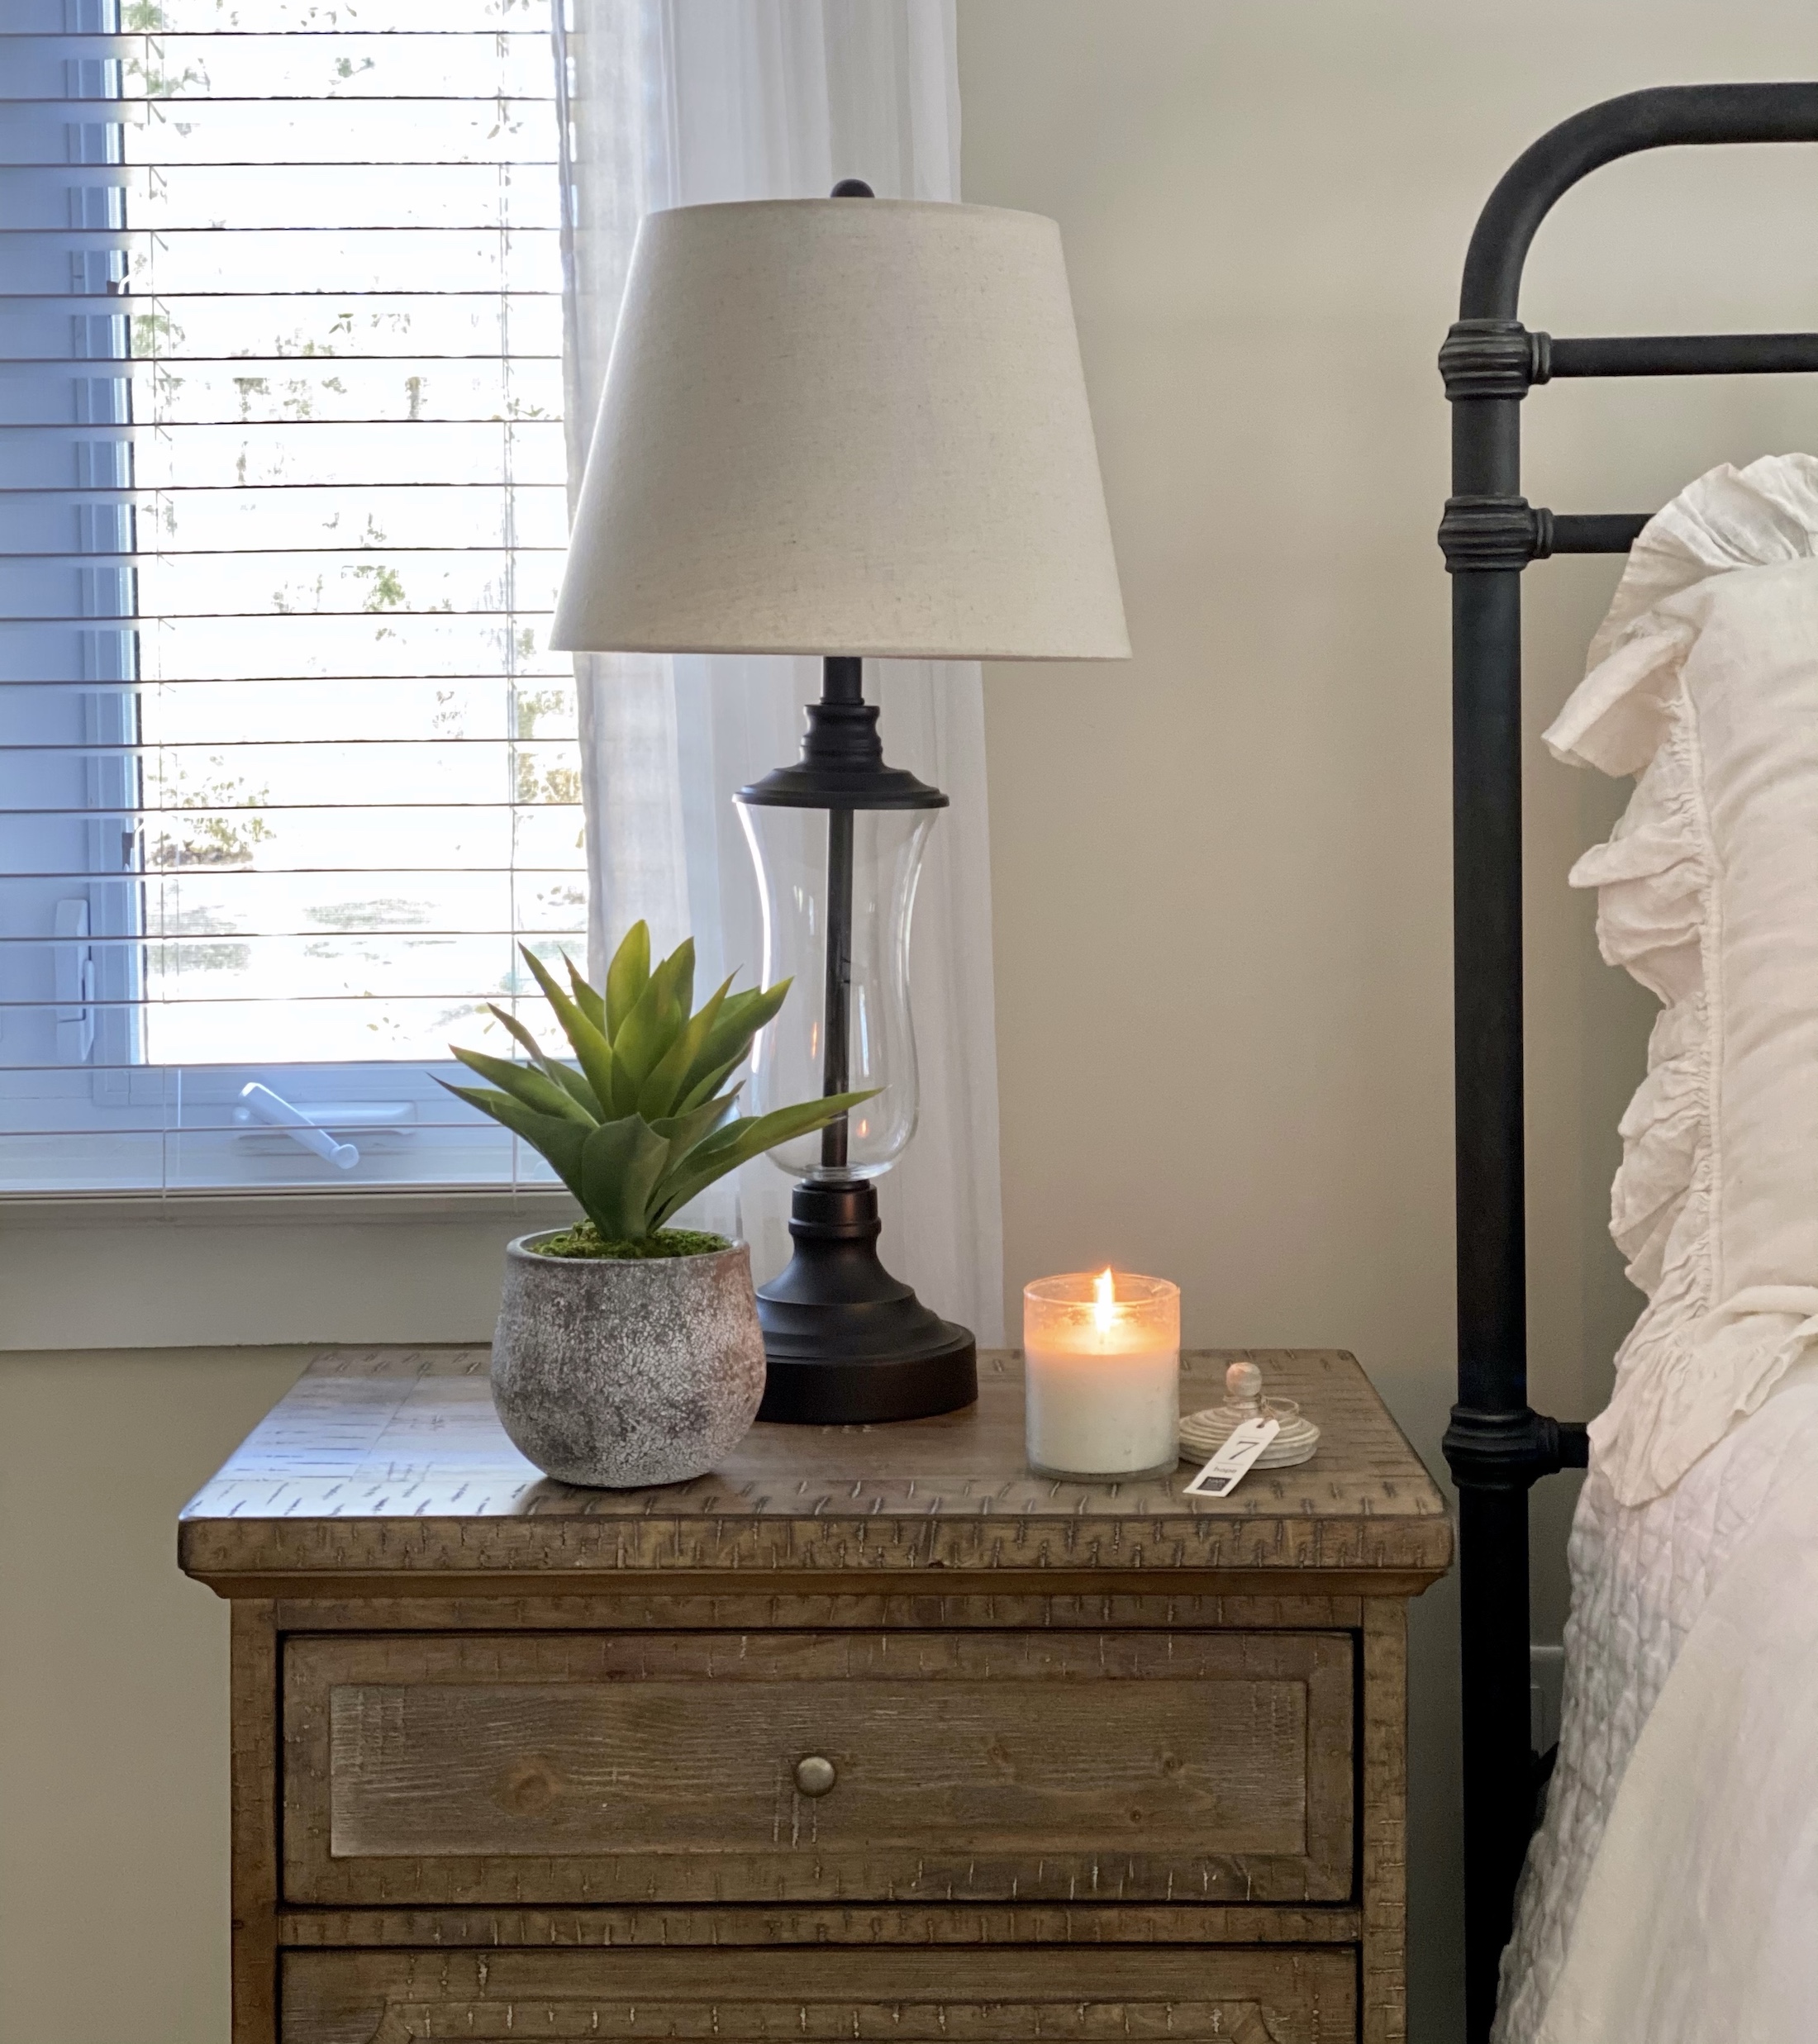 The perfect bedside essentials: a faux plant, candle, and bronze and glass lamp on a wood nightstand next to the bed.